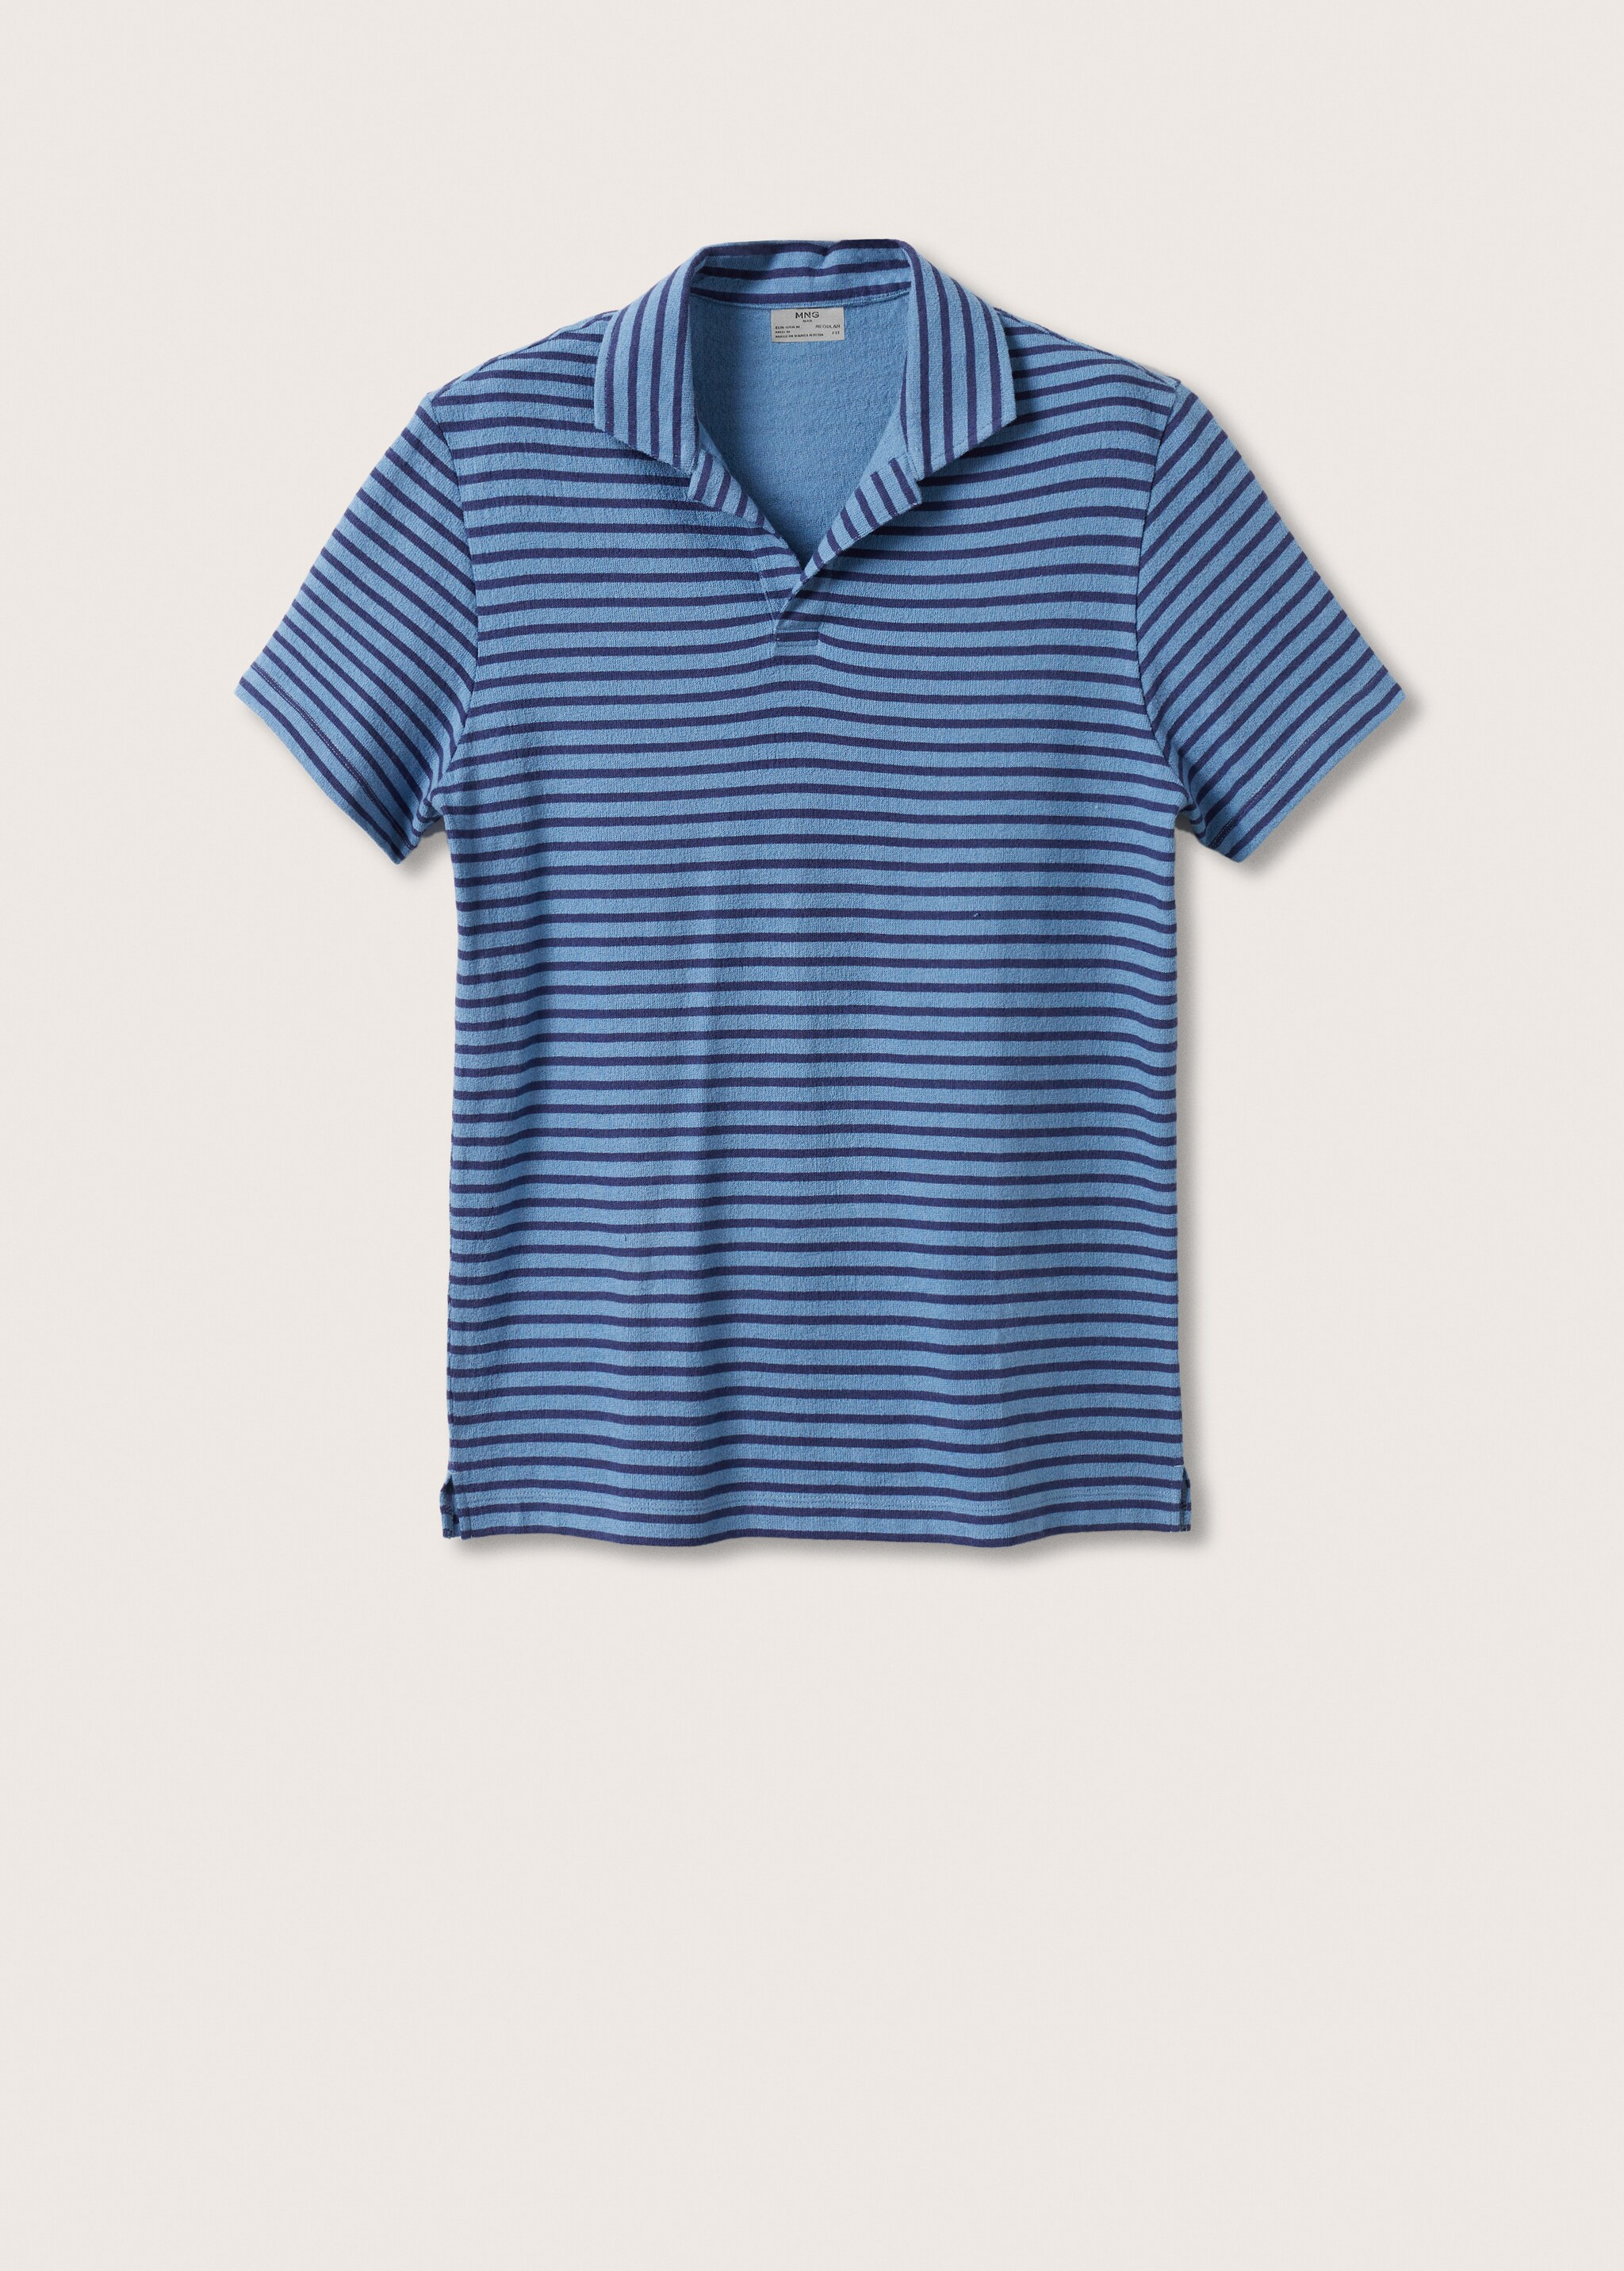 Striped terry cloth polo shirt - Article without model